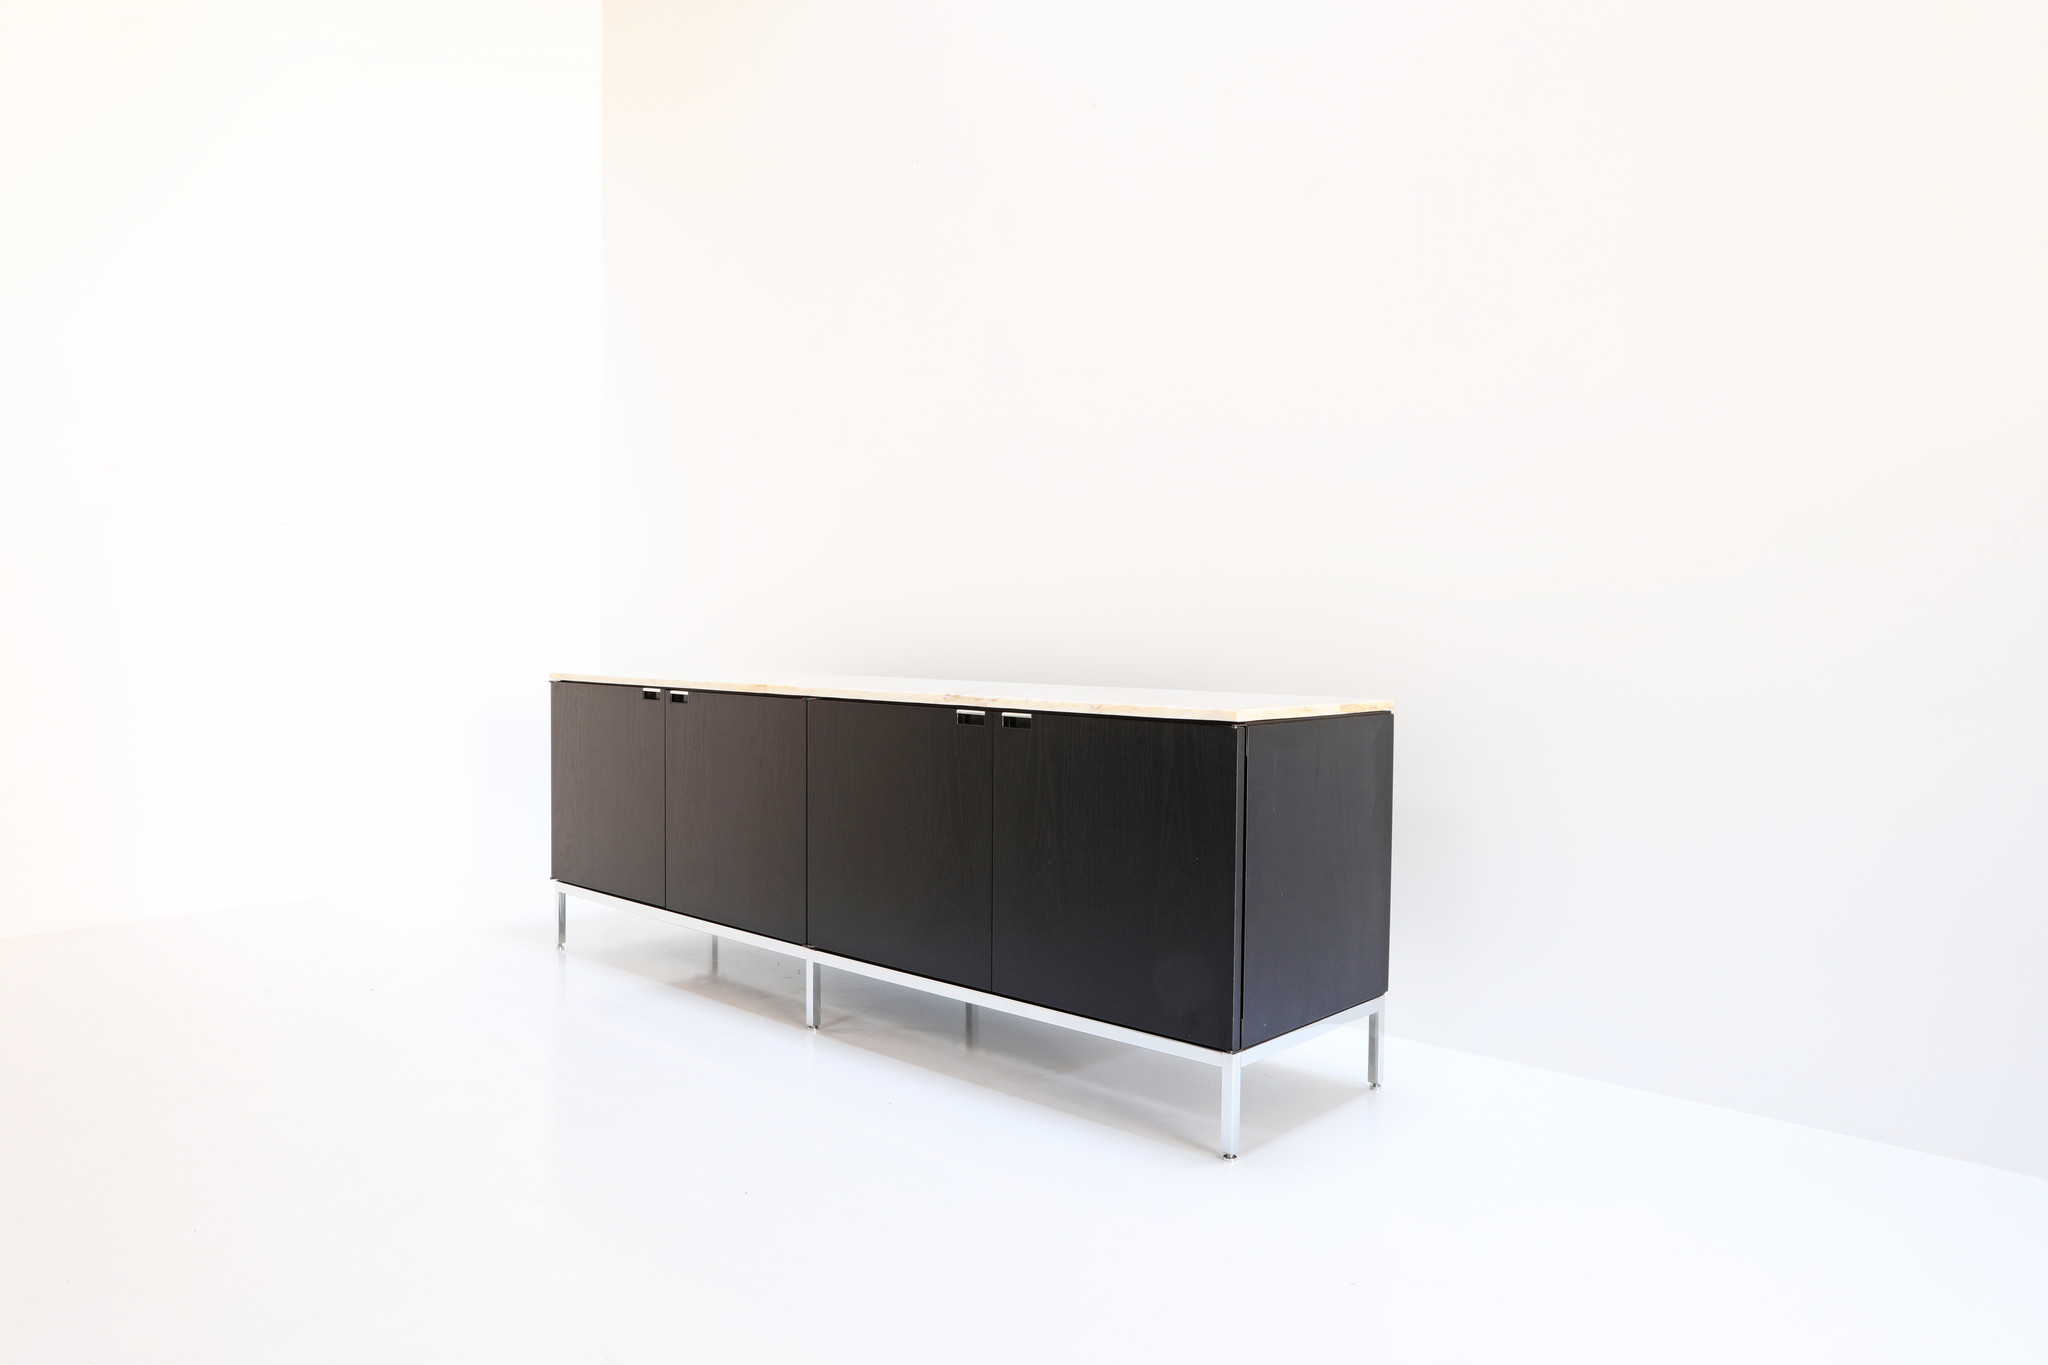 KNOLL CREDENZA ONTWORPEN DOOR FLORENCE KNOLL, 1961